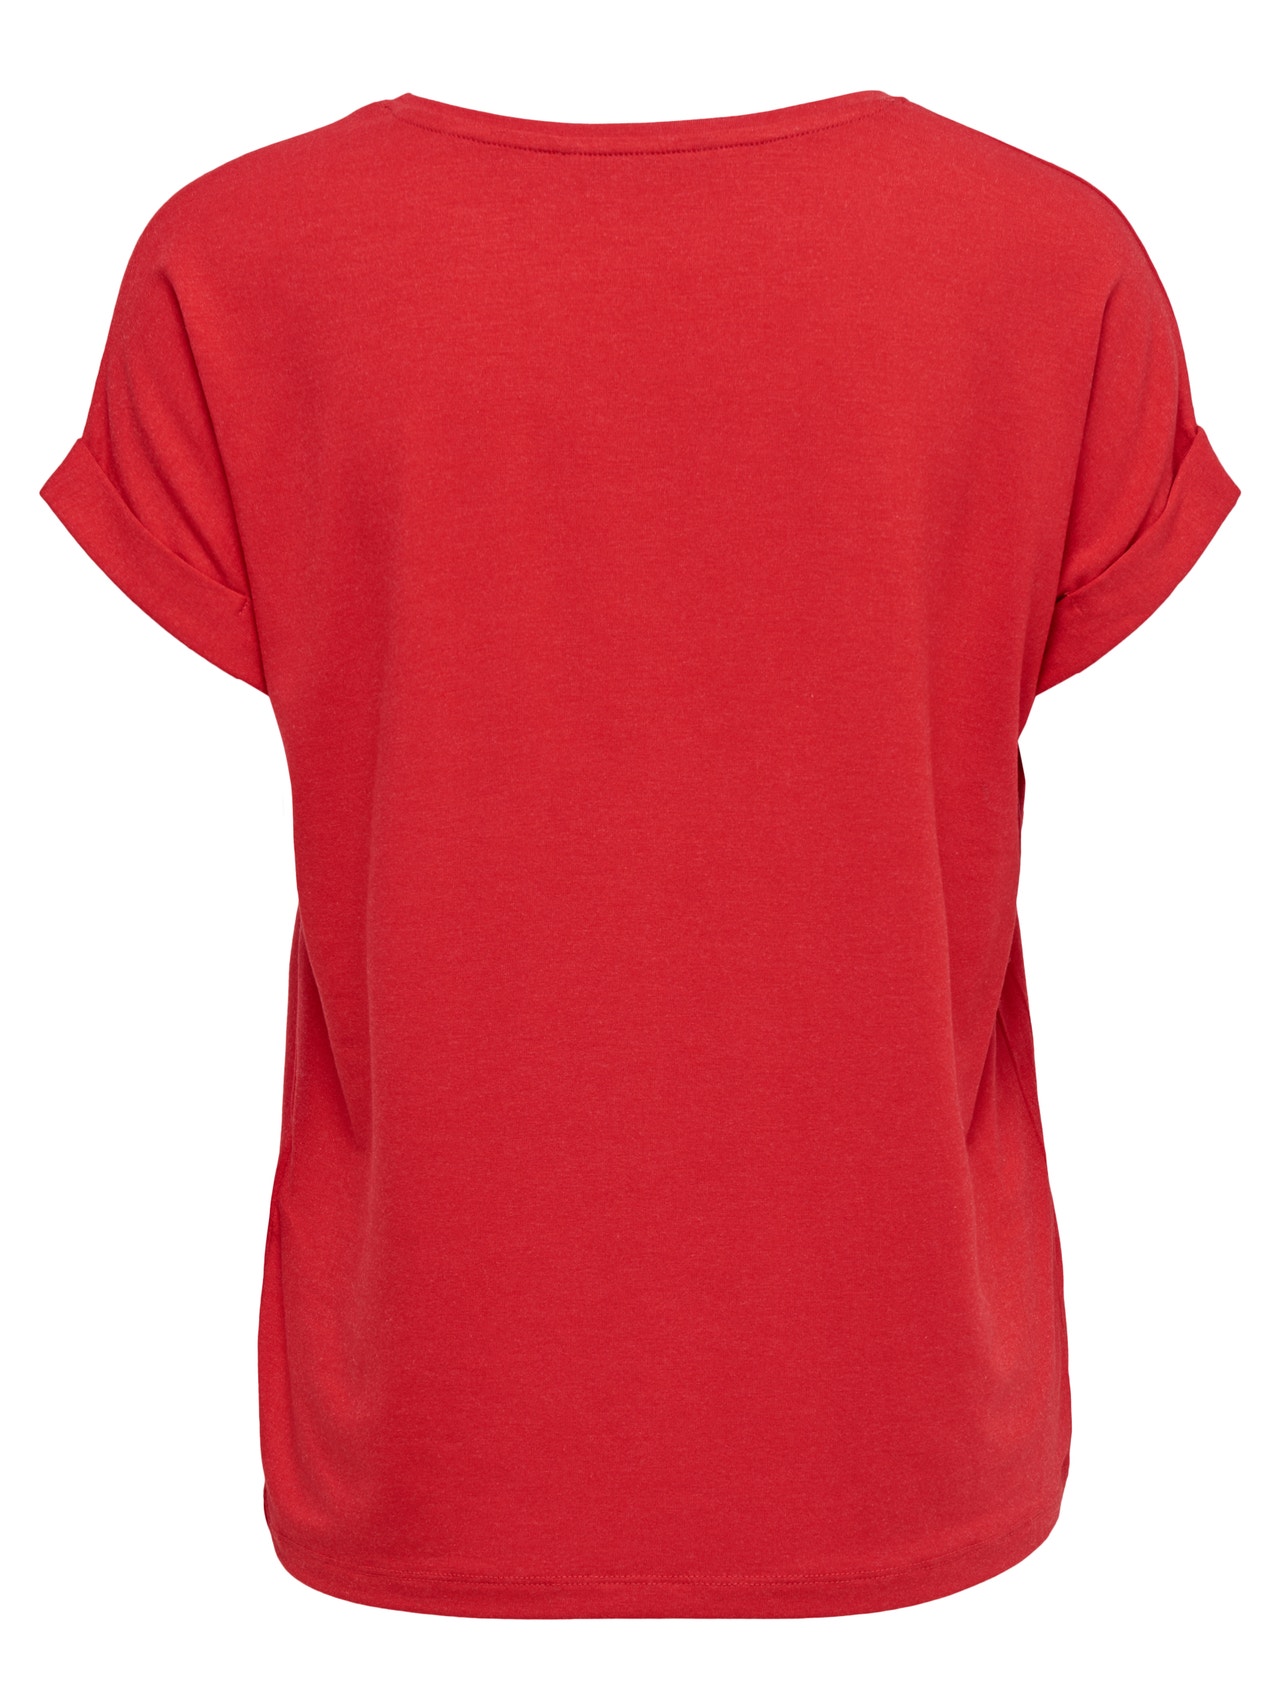 ONLY Ample T-Shirt -Mars Red - 15106662